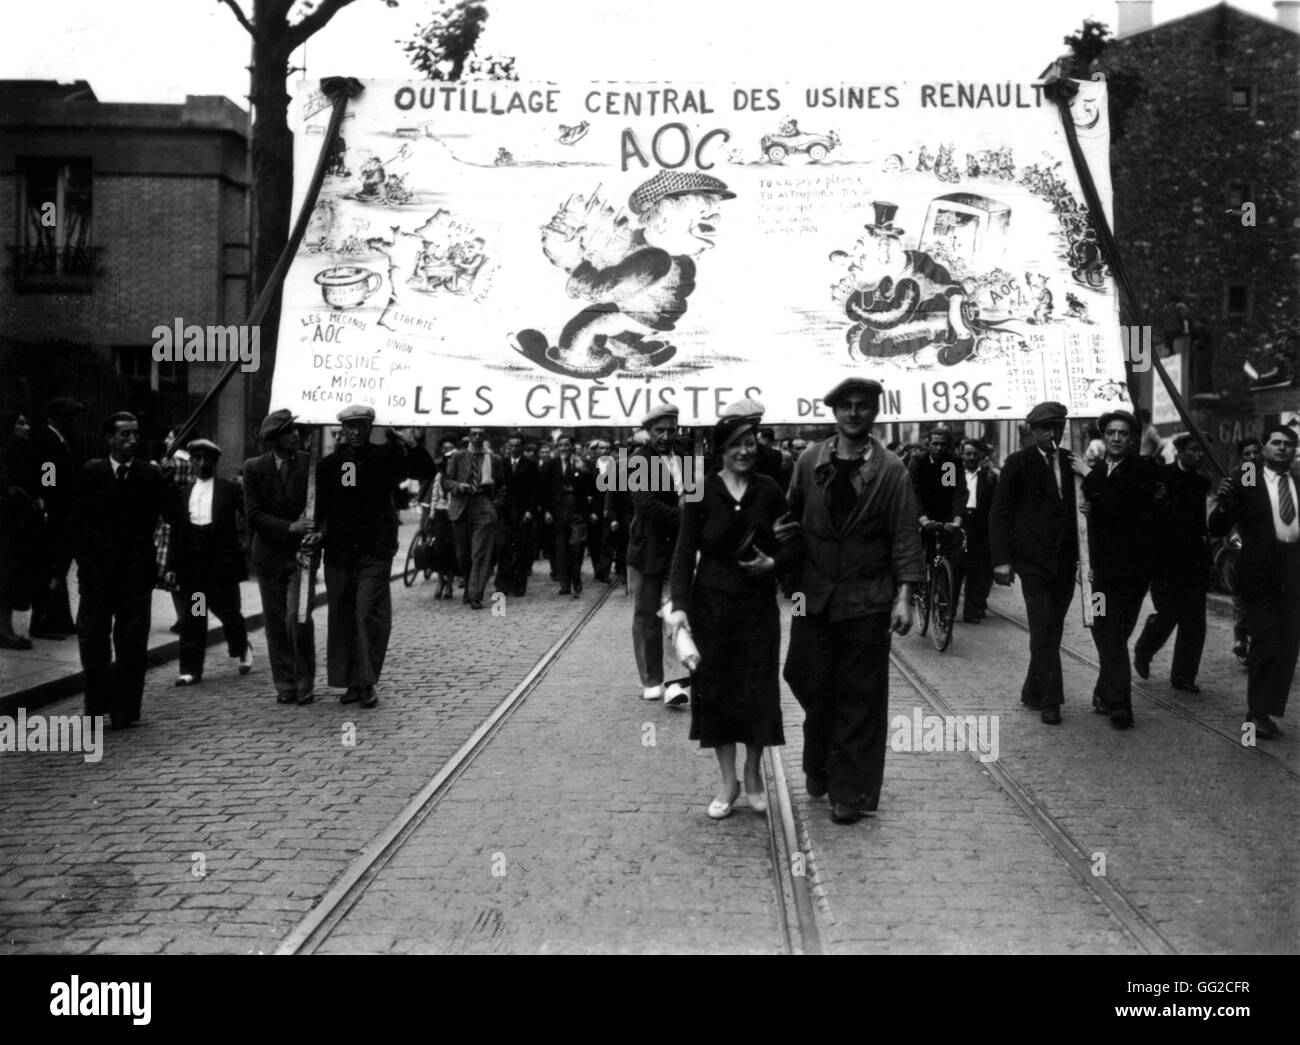 The Renault factories being evacuated in Paris in 1936 Many workers are going on strike since the rise to power of the Popular Front in France. Stock Photo